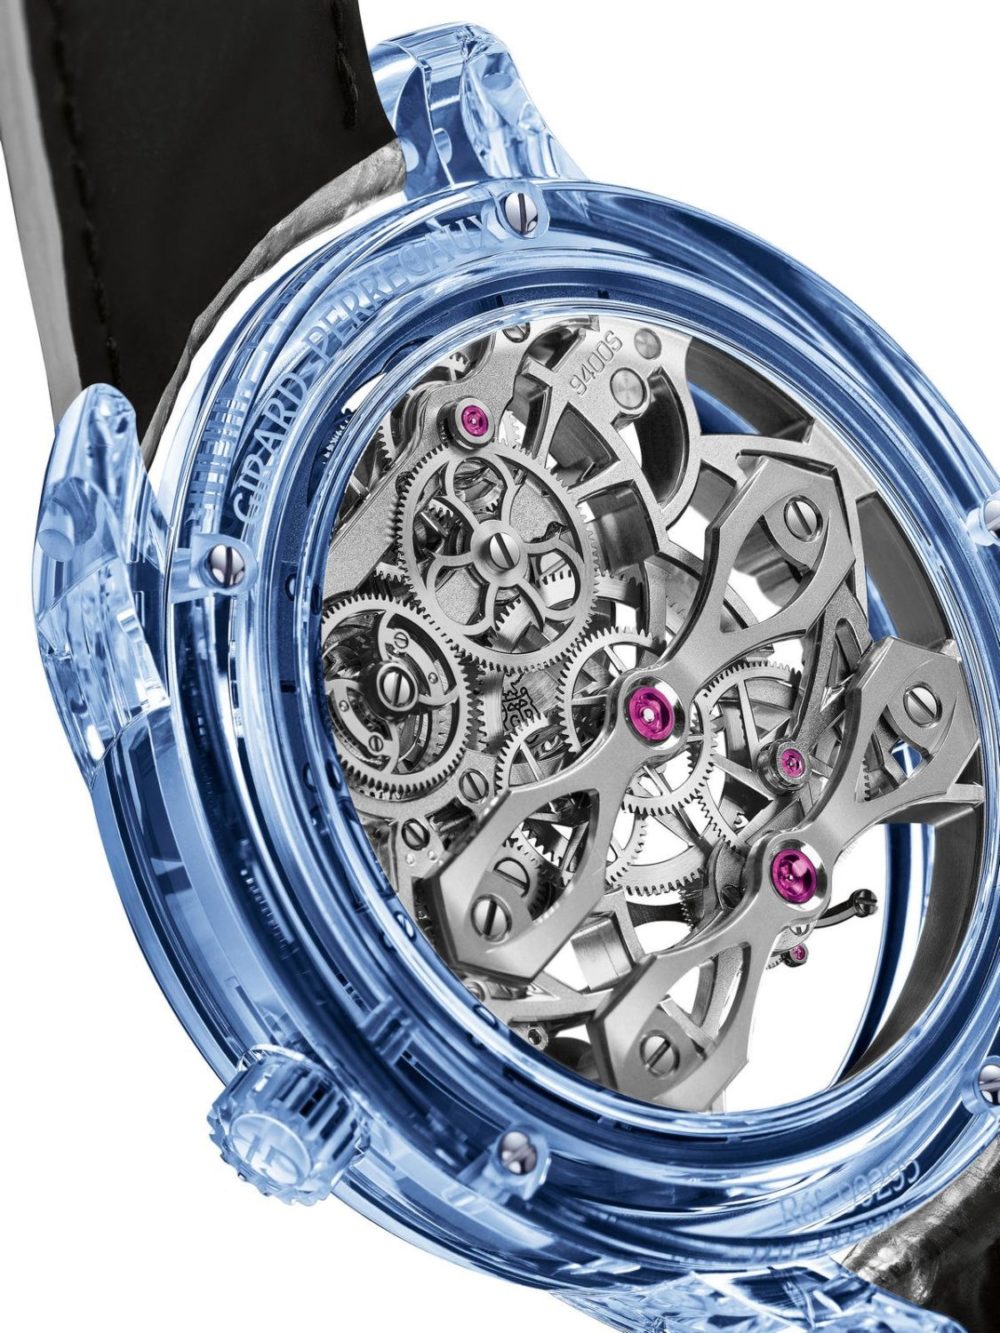 The Girard-Perregaux Quasar Azure watch is limited to just 8 pieces